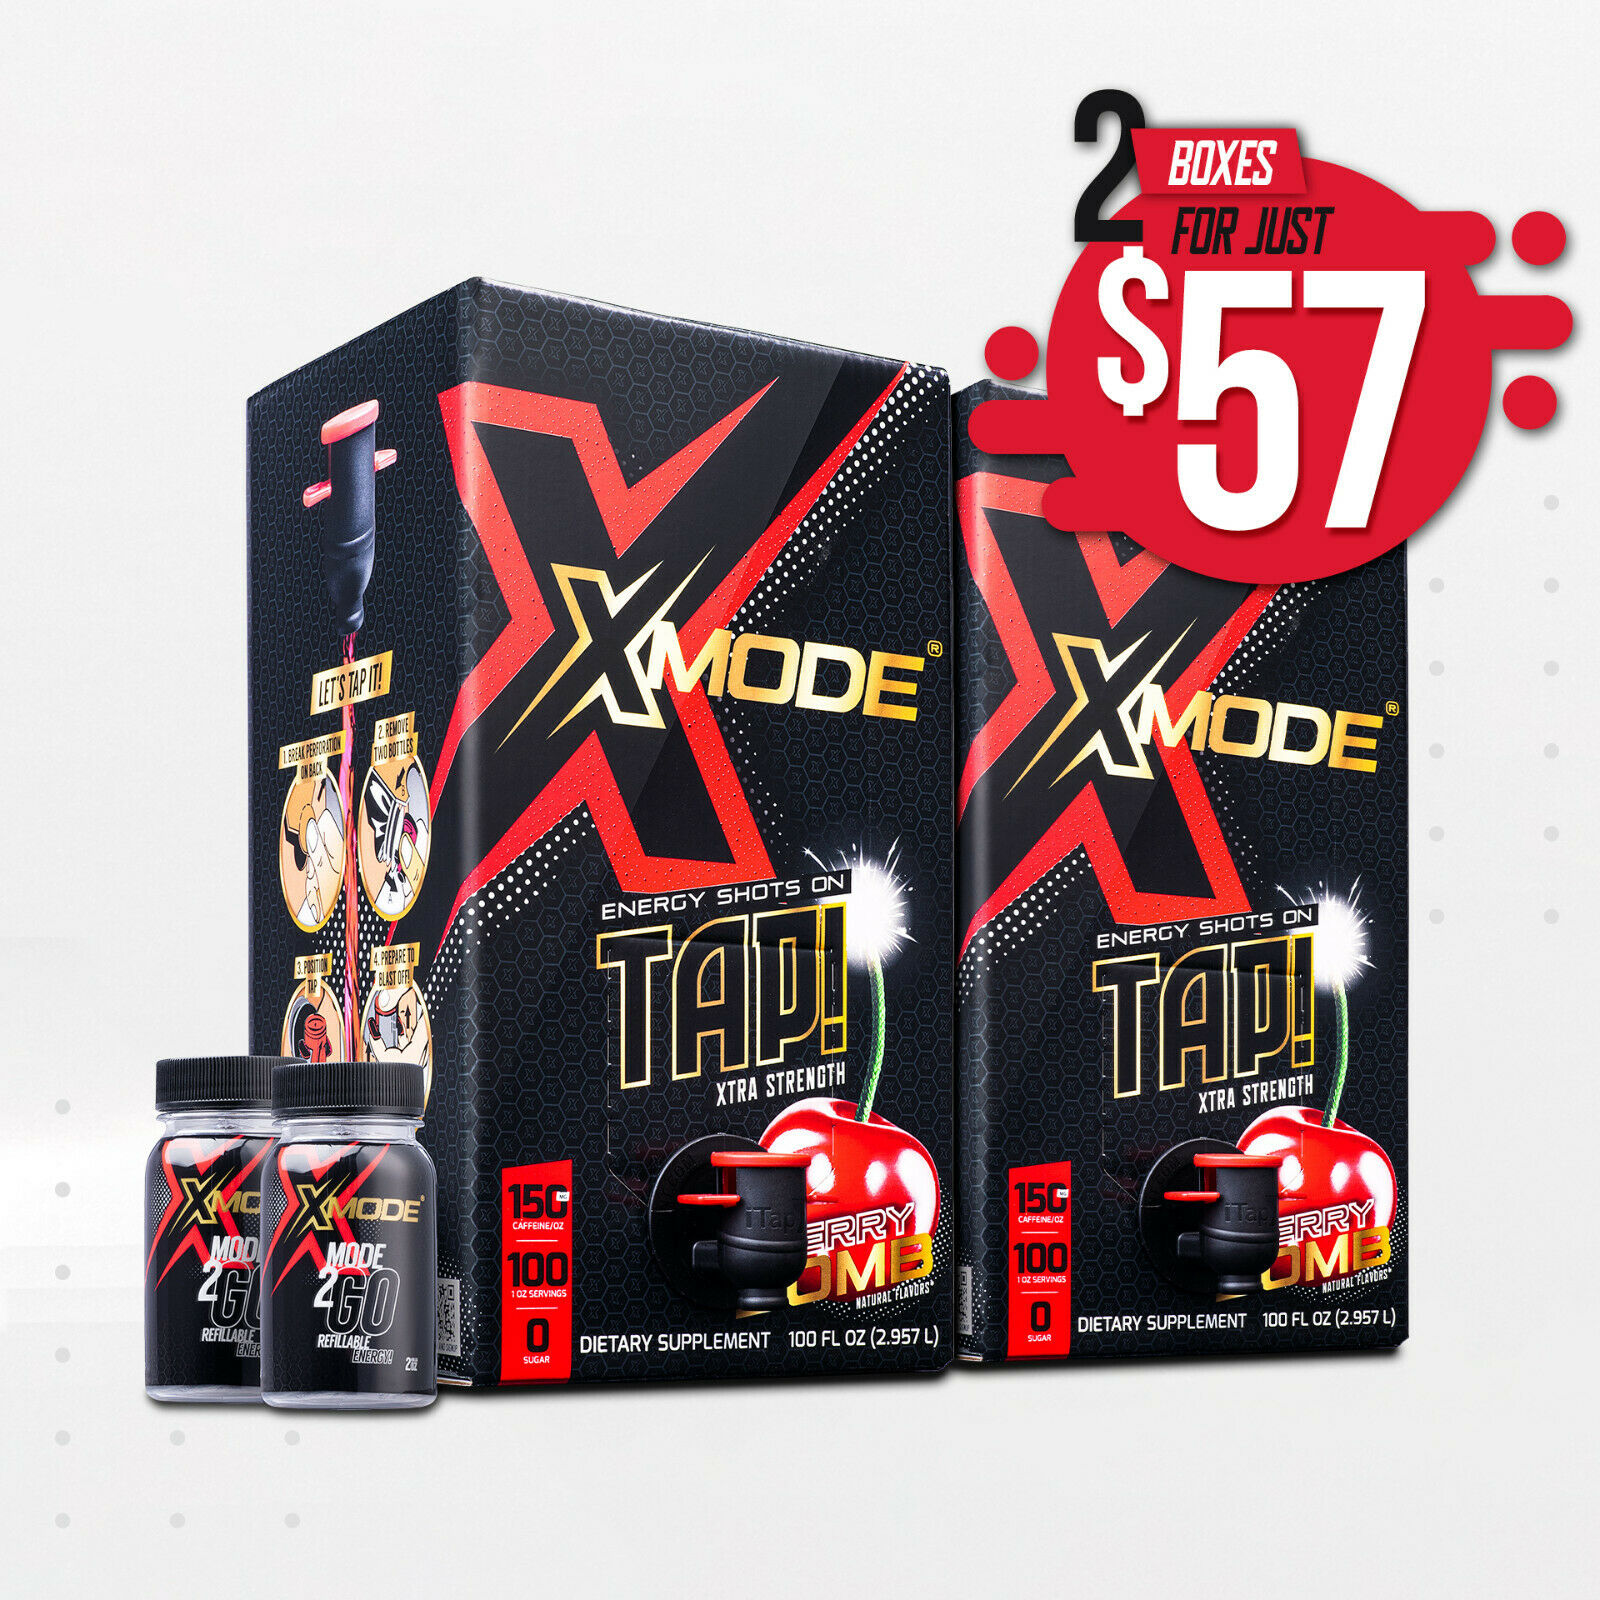 XMODE Super Premium Energy Shots (Double Box - 200 Svngs for $57 - Save 600%)